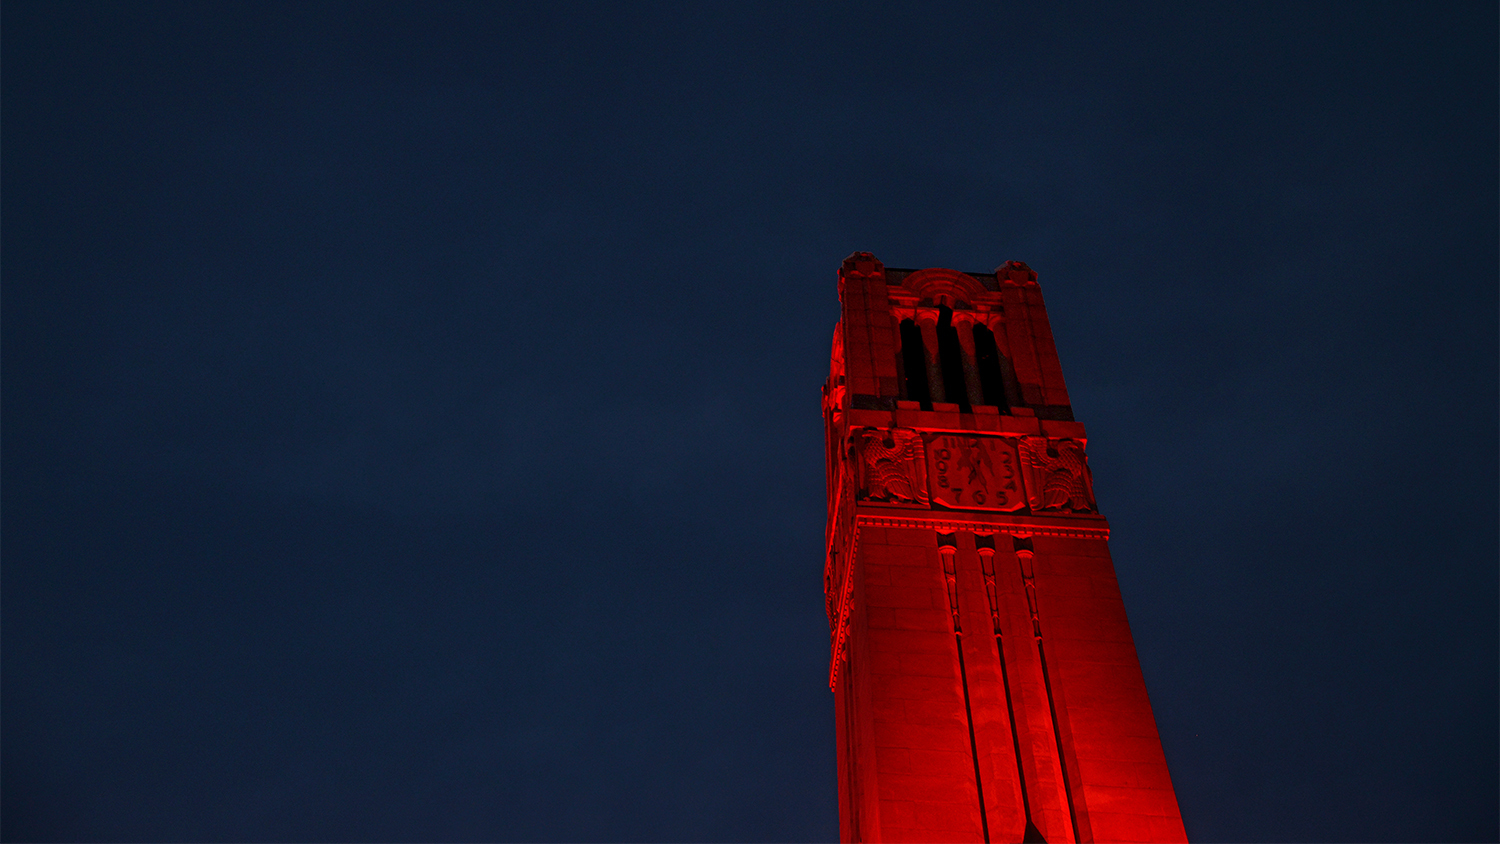 The Belltower, lit red in honor of an ACC basketball win.